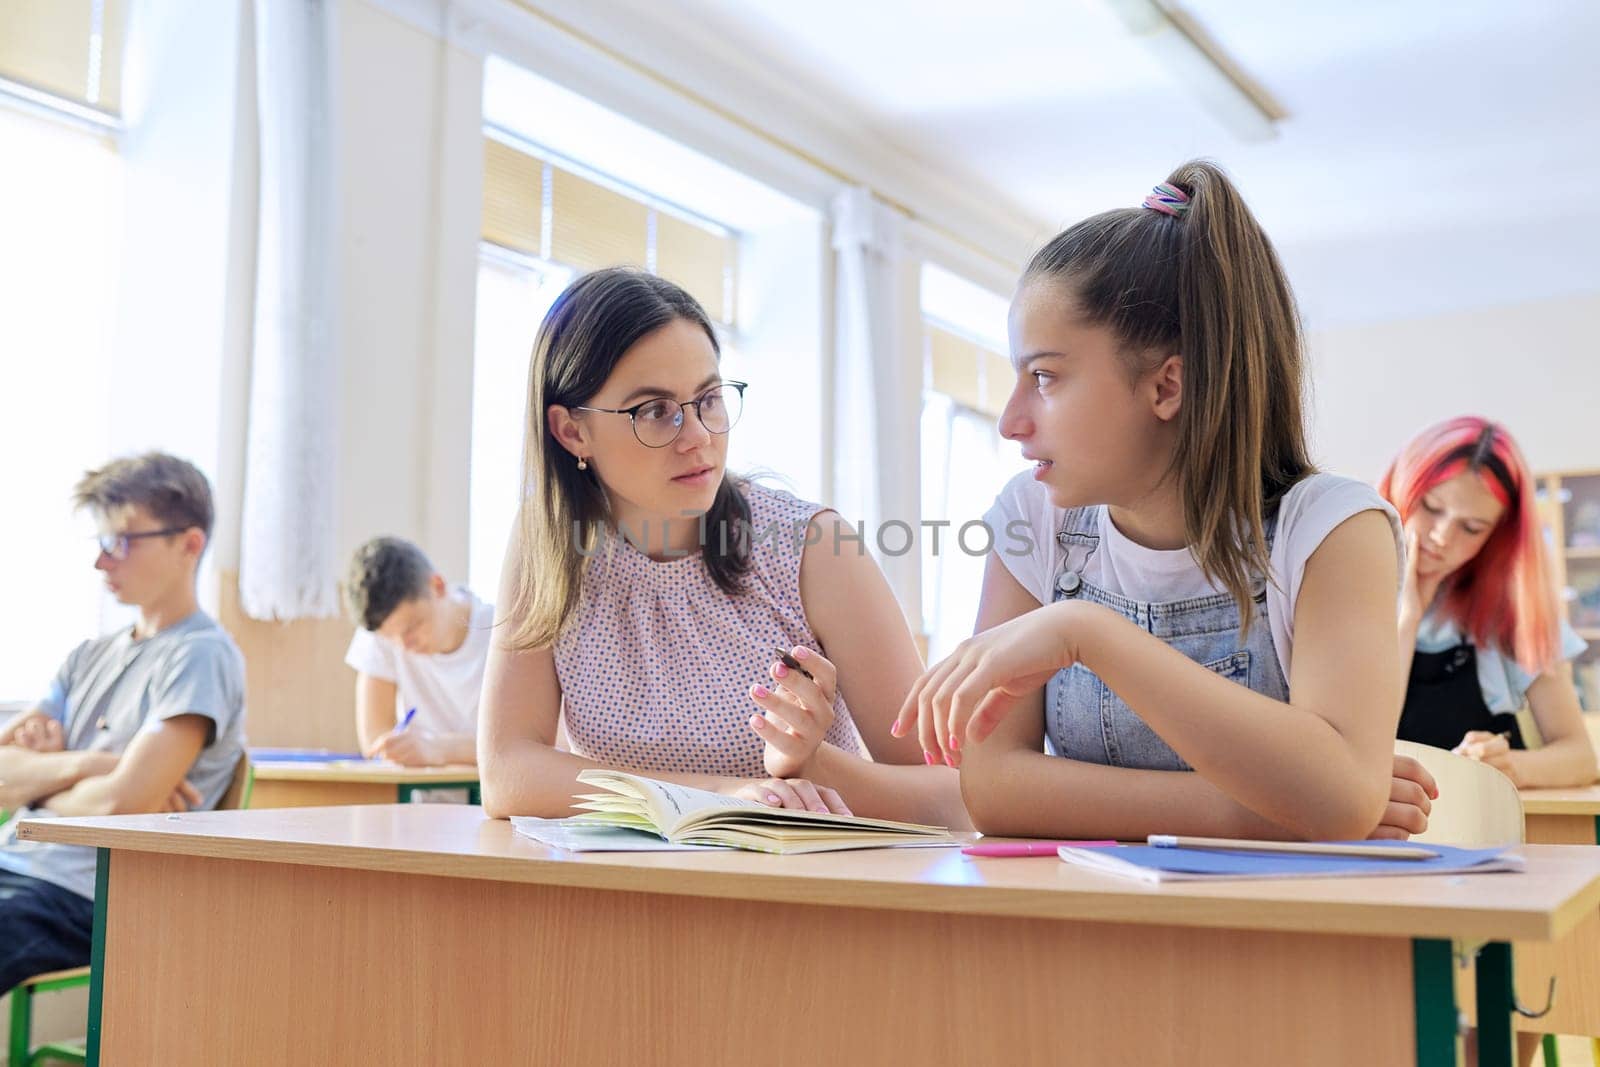 Young woman teacher teaches lesson in classroom of teenage children, teacher sits at desk with student, checks knowledge. Education, school, college, teaching concept